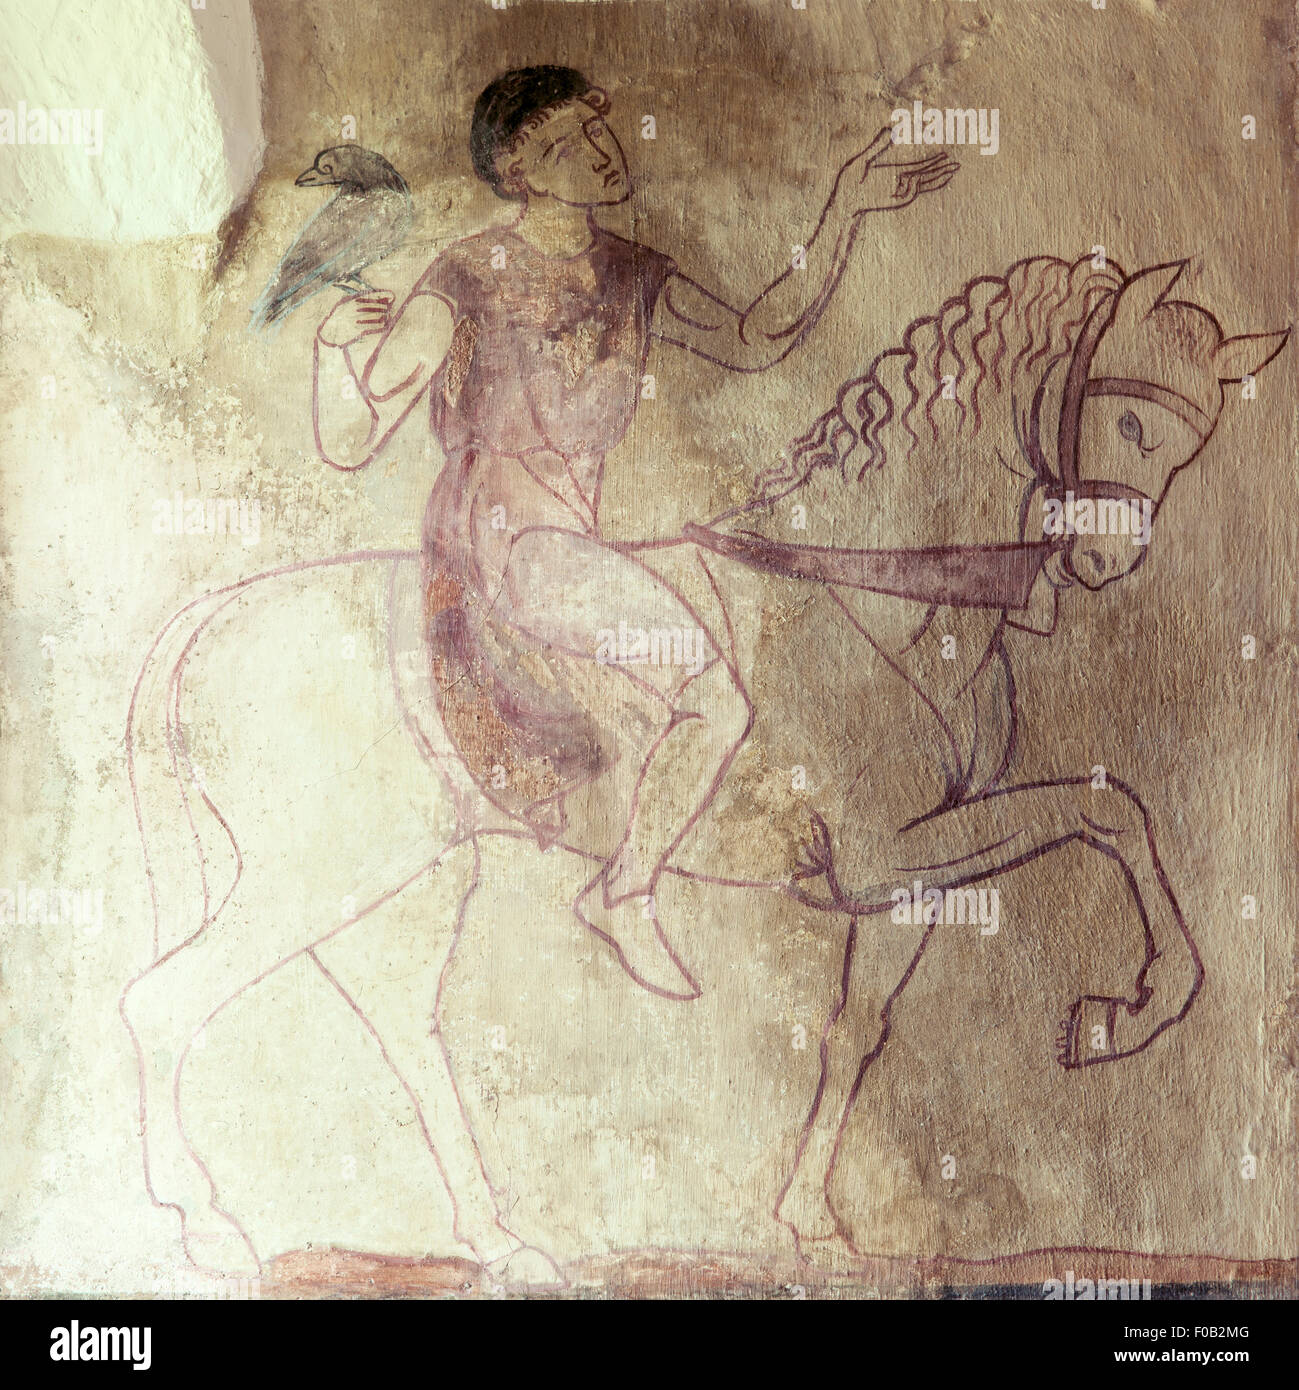 A hawker on horseback as depicted in a medieval wall painting in Easby Church, Richmond, North Yorkshire, England Stock Photo